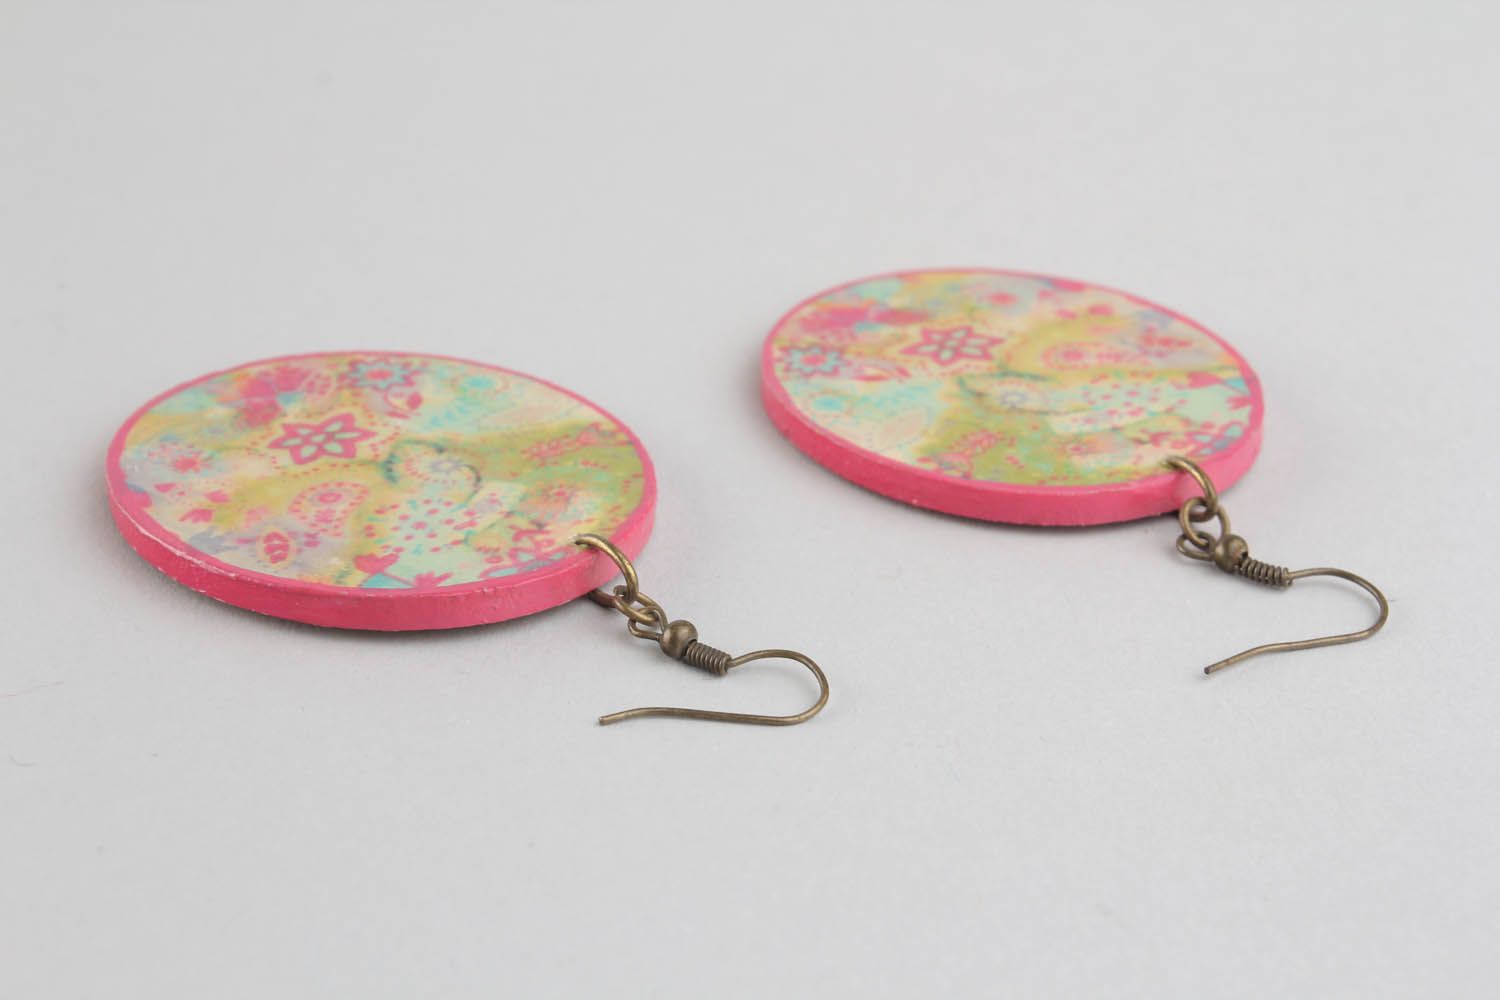 Earrings made of wood and epoxy resin photo 3